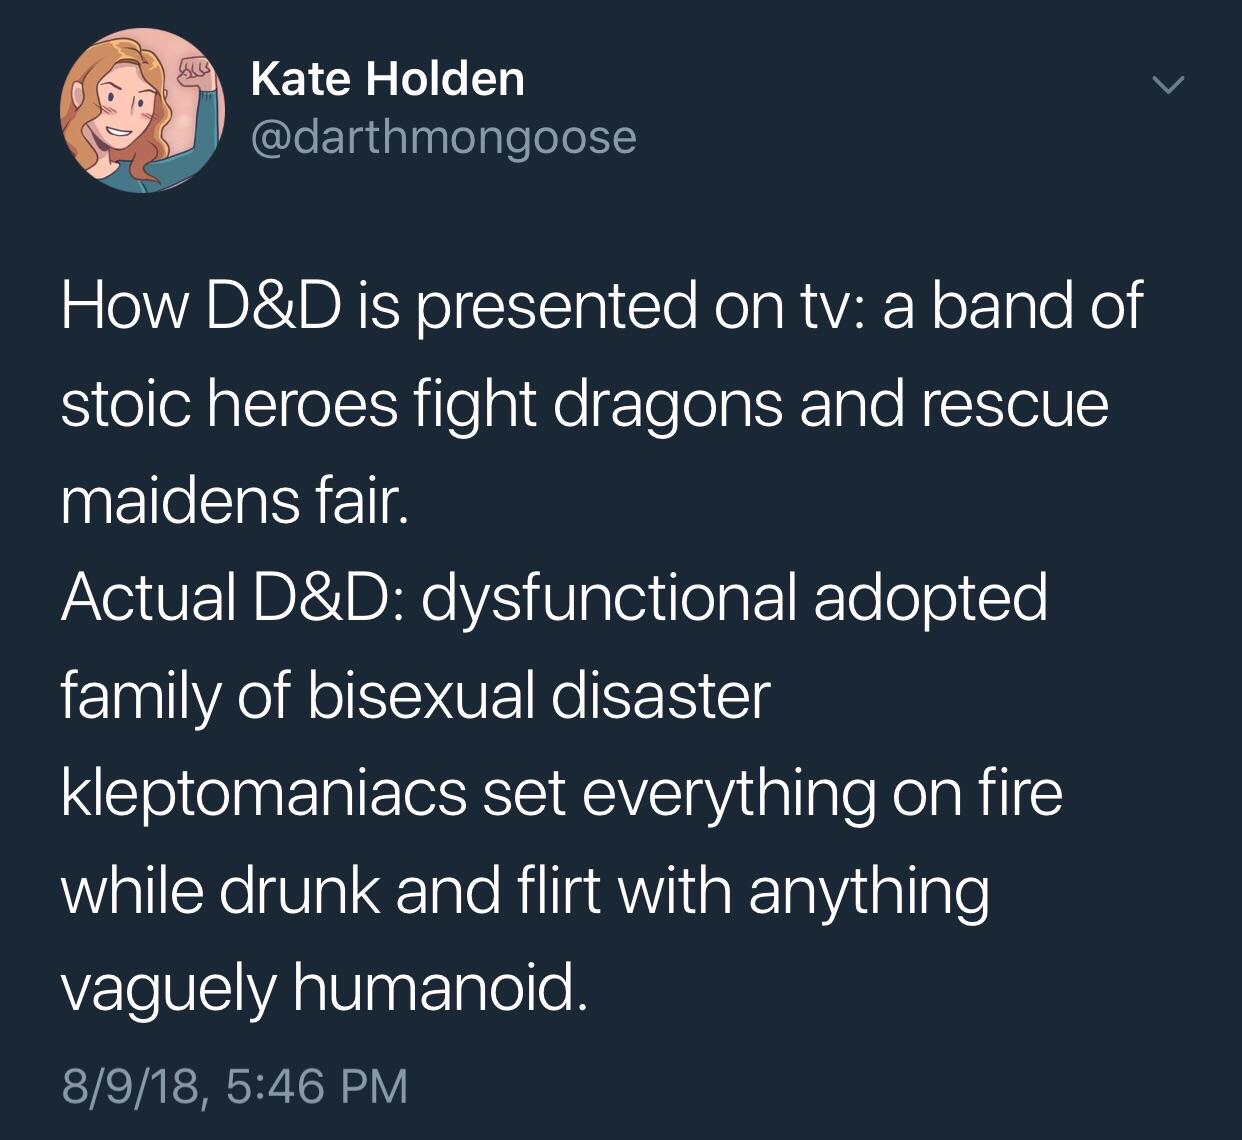 d&d expectation vs reality - sty Kate Holden How D&D is presented on tv a band of stoic heroes fight dragons and rescue maidens fair. Actual D&D dysfunctional adopted family of bisexual disaster kleptomaniacs set everything on fire while drunk and flirt w